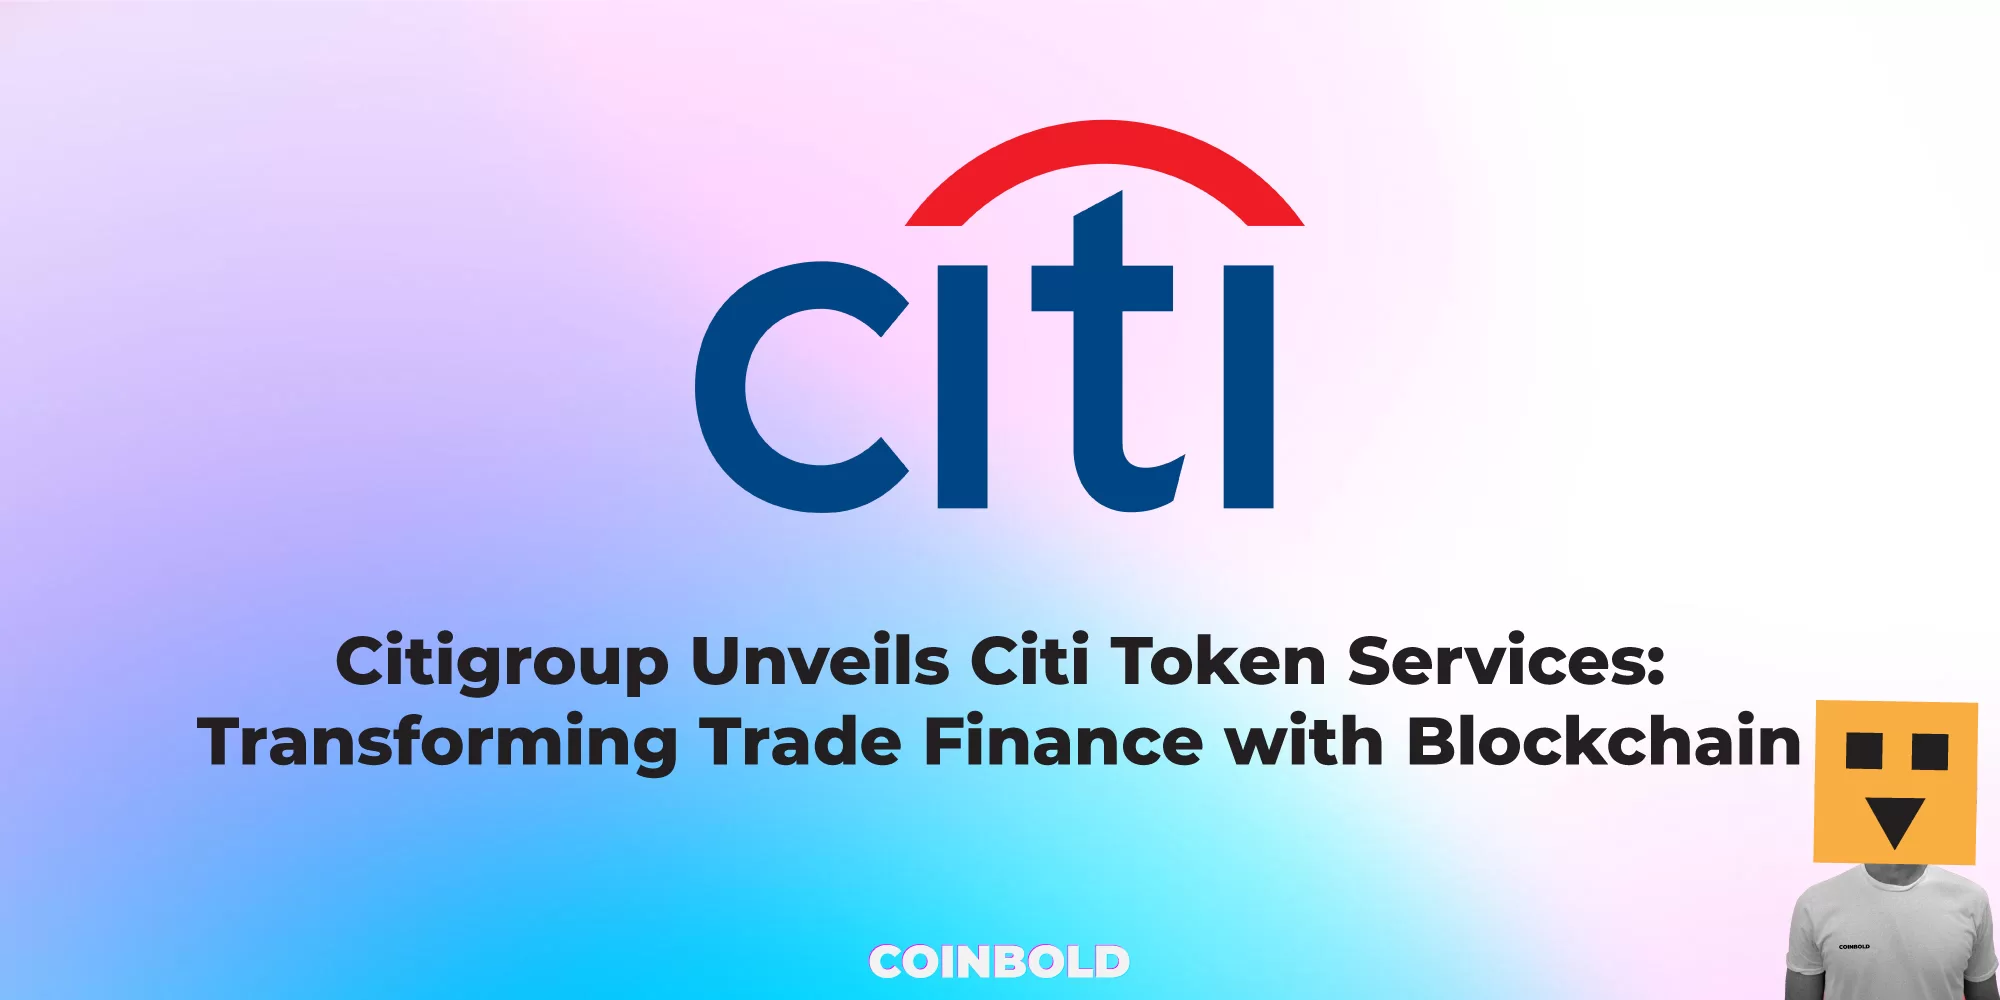 Citigroup Unveils Citi Token Services Transforming Trade Finance with Blockchain